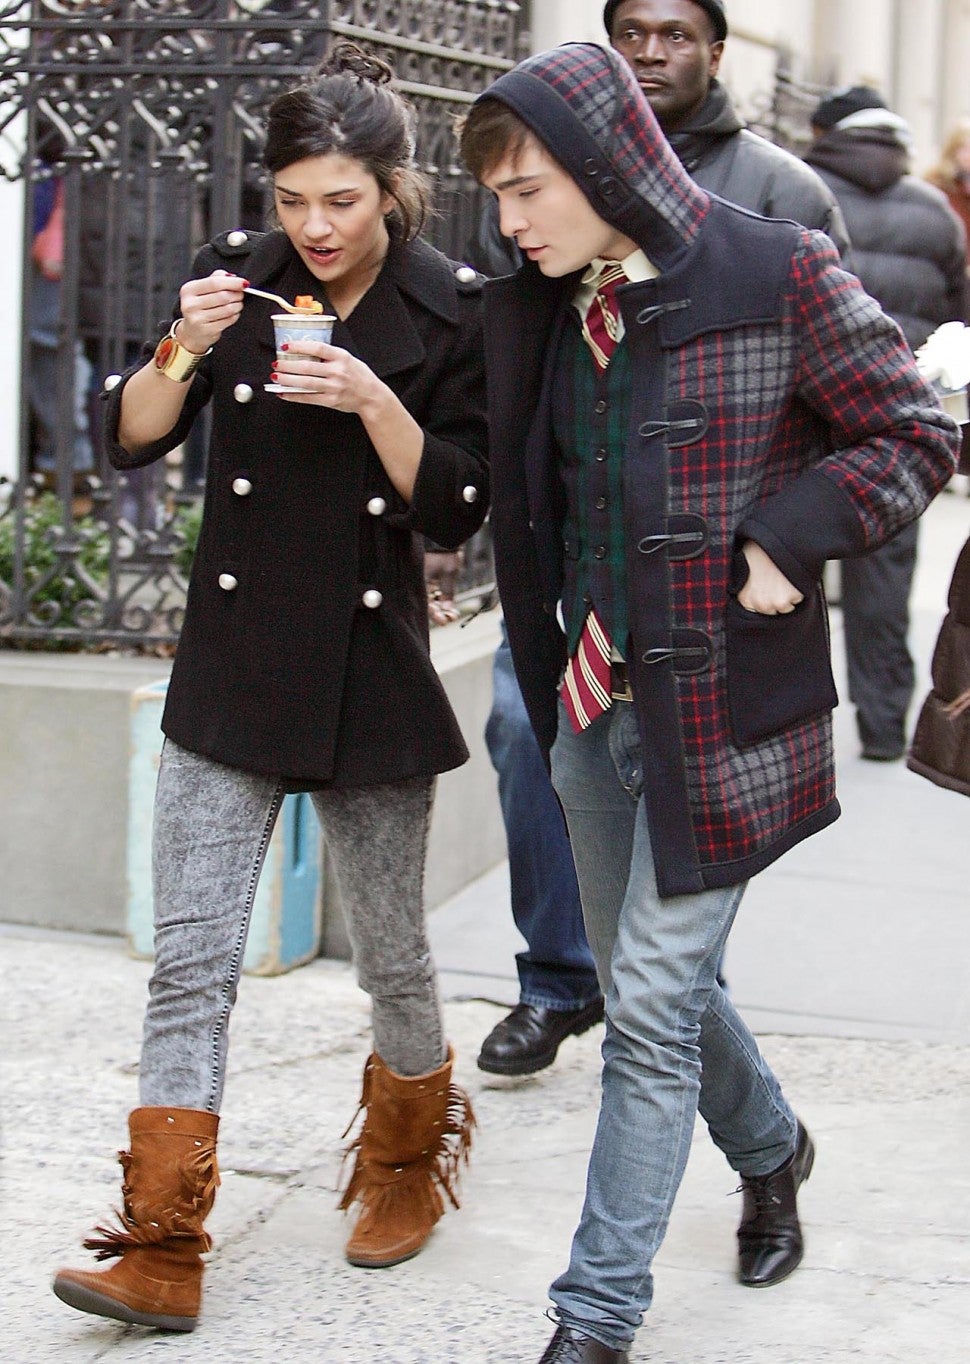 Jessica Szohr and Ed Westwick on the set of 'Gossip Girl' in 2009